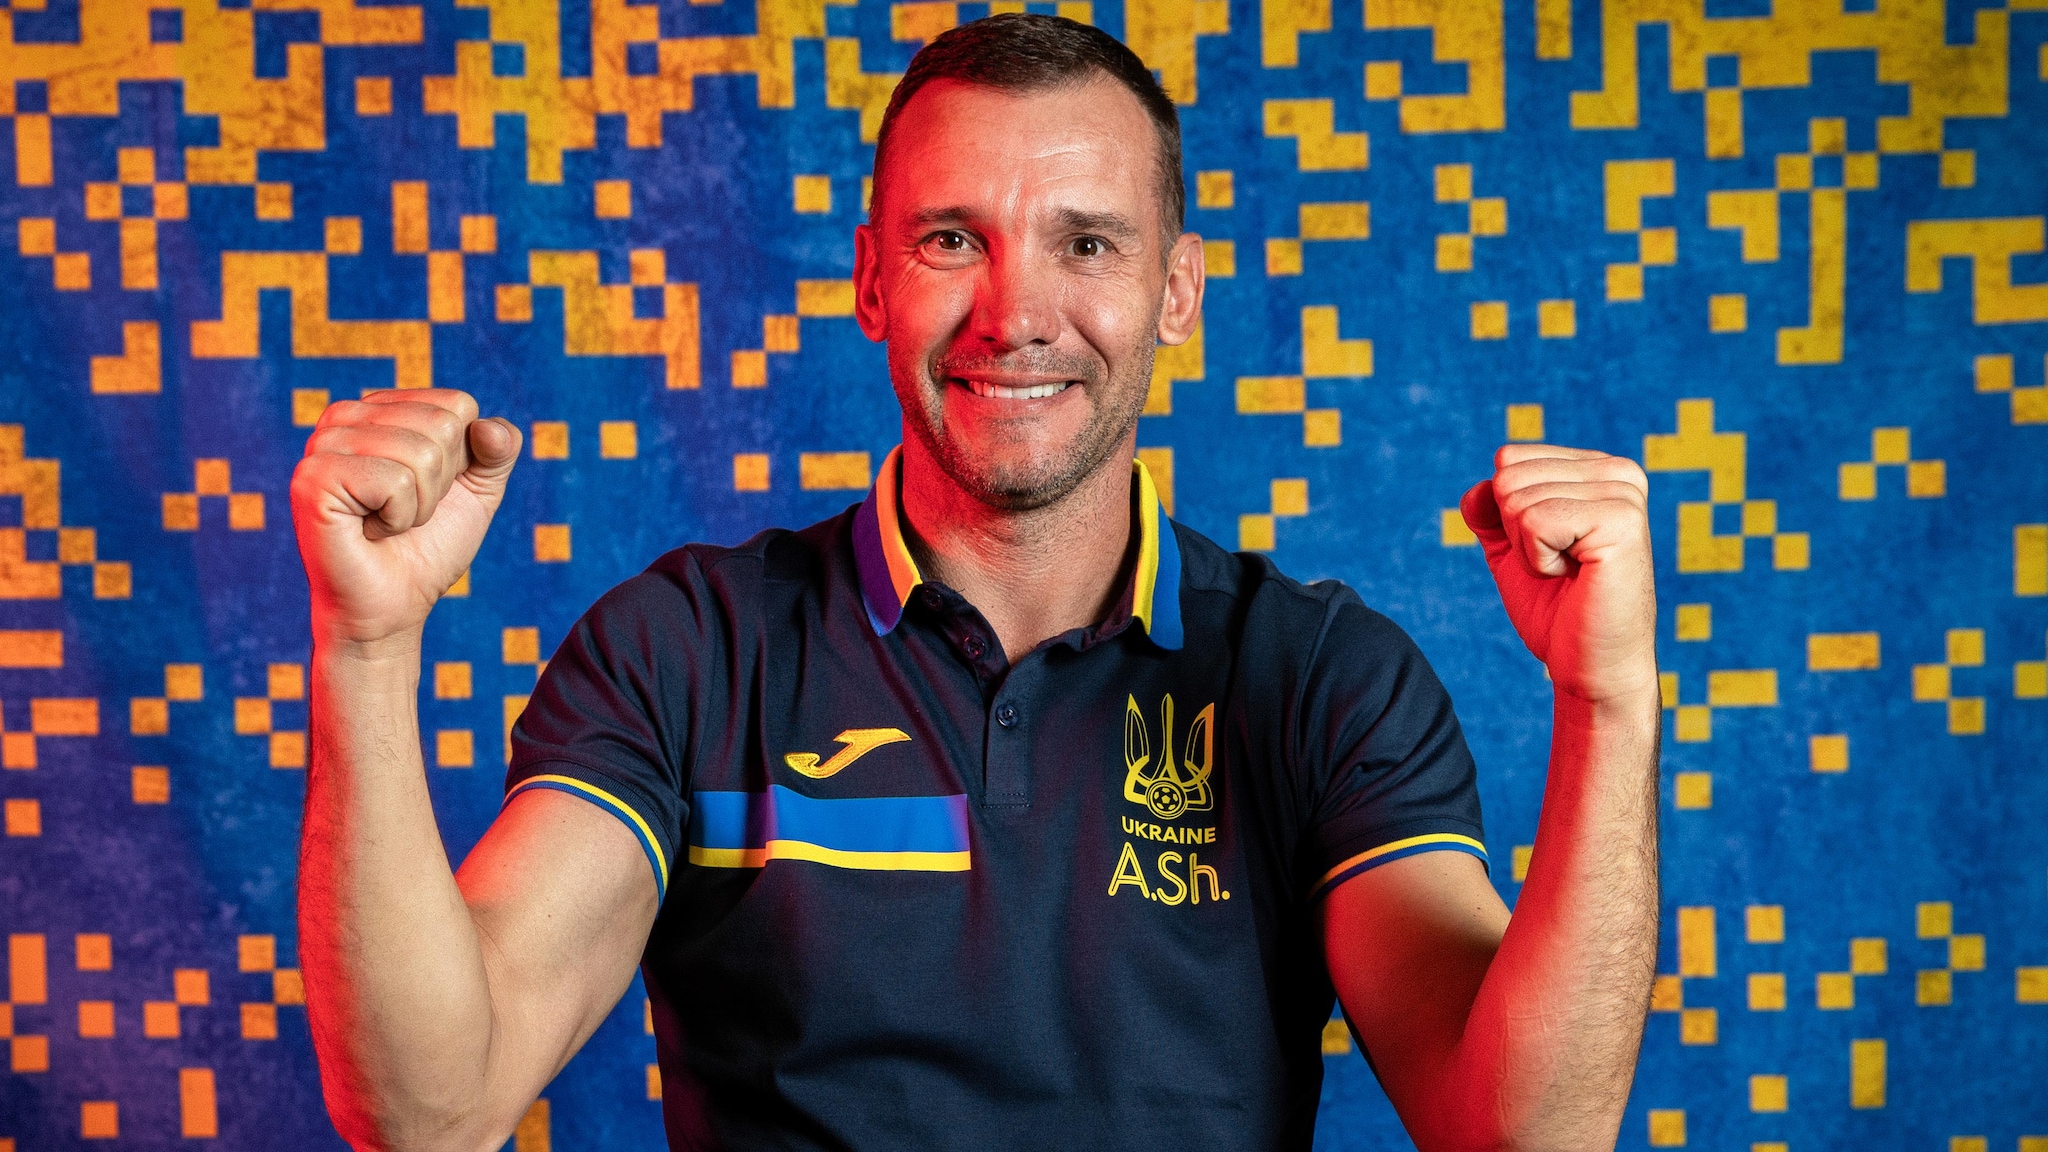 Andriy Shevchenko on Ukraine&#39;s principles, EURO nous and his side&#39;s Group C opponents | UEFA EURO 2020 | UEFA.com